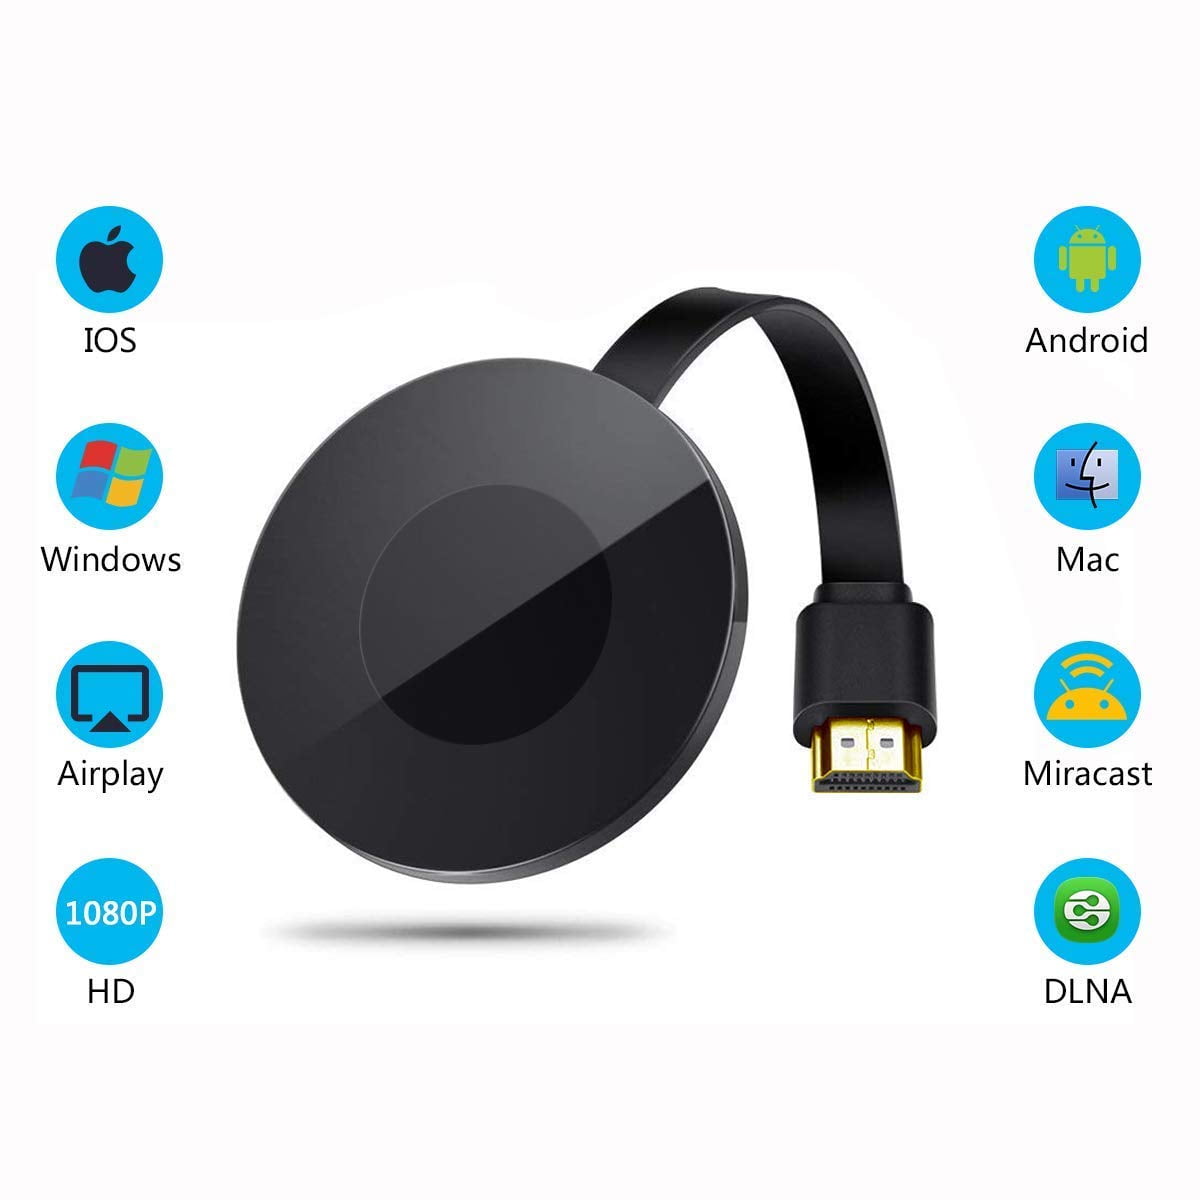 AirMirror Supporte DLNA iOS Miracast Windows pour Android FKH Wireless HDMI Display Adapter,Adaptateur daffichage HDMI sans Fil WiFi Récepteur Dongle 4K 1080P 2,4 GHz Airplay 